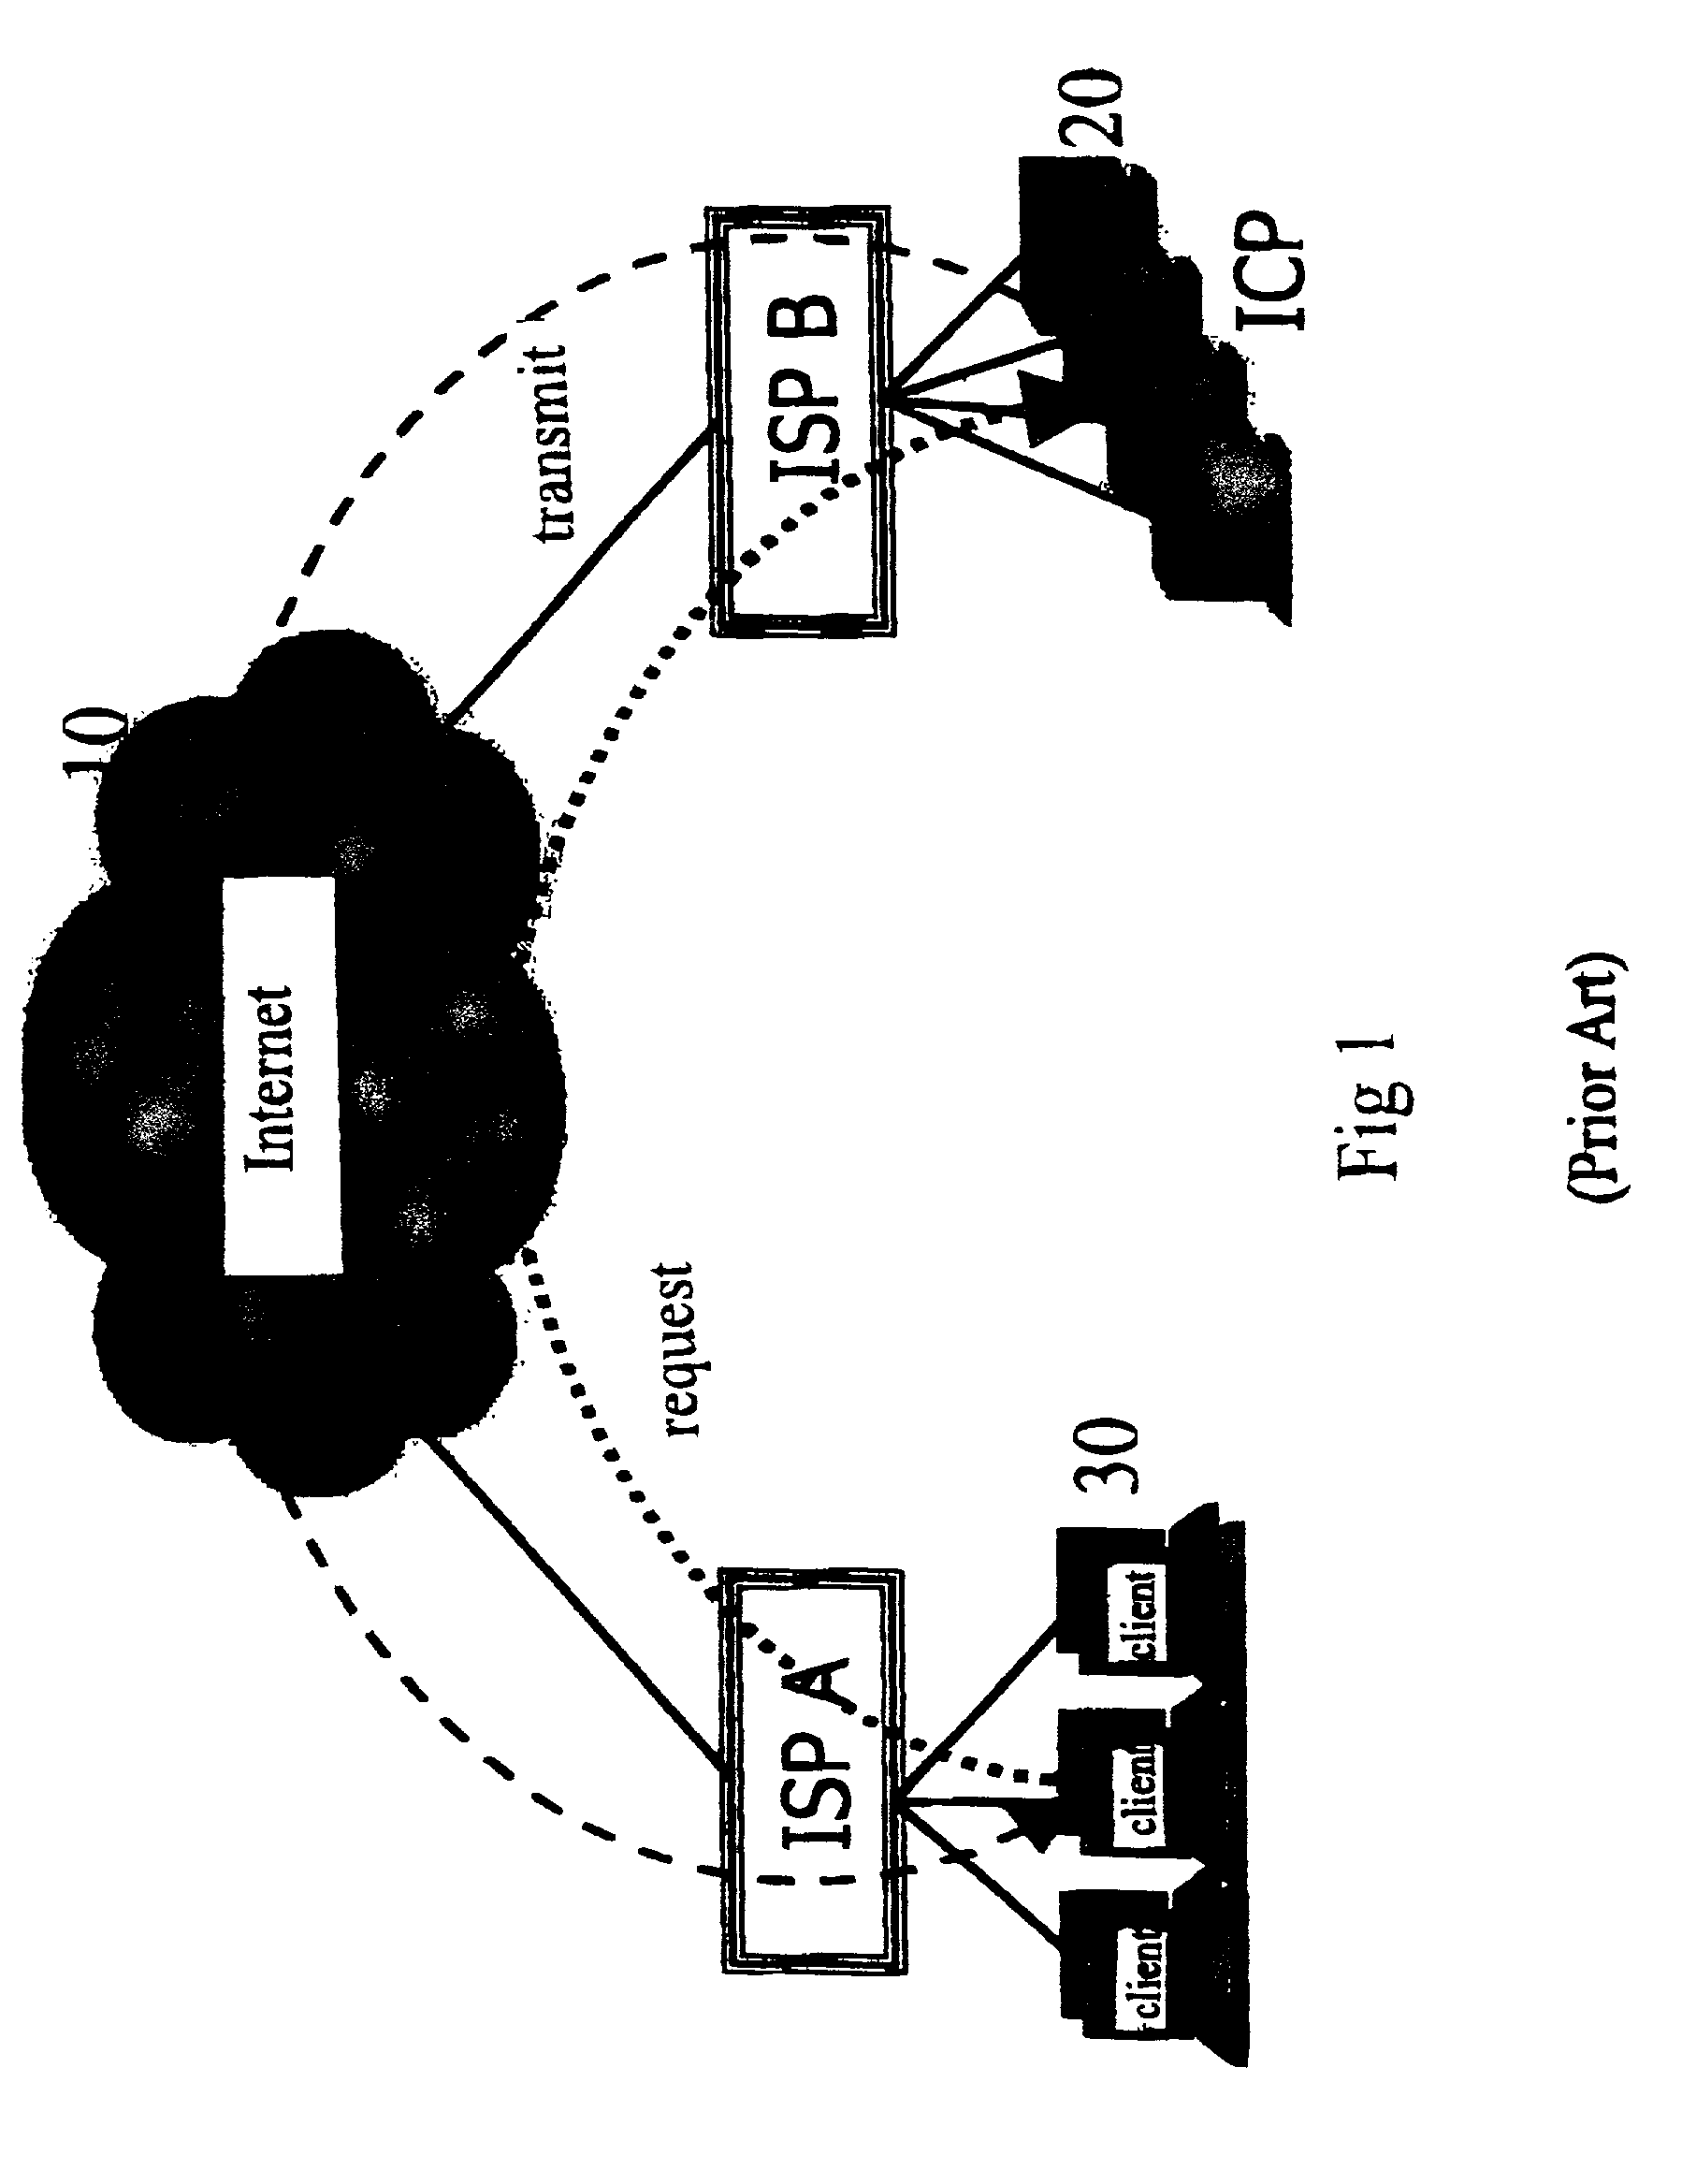 Content delivery network system and method for building the same